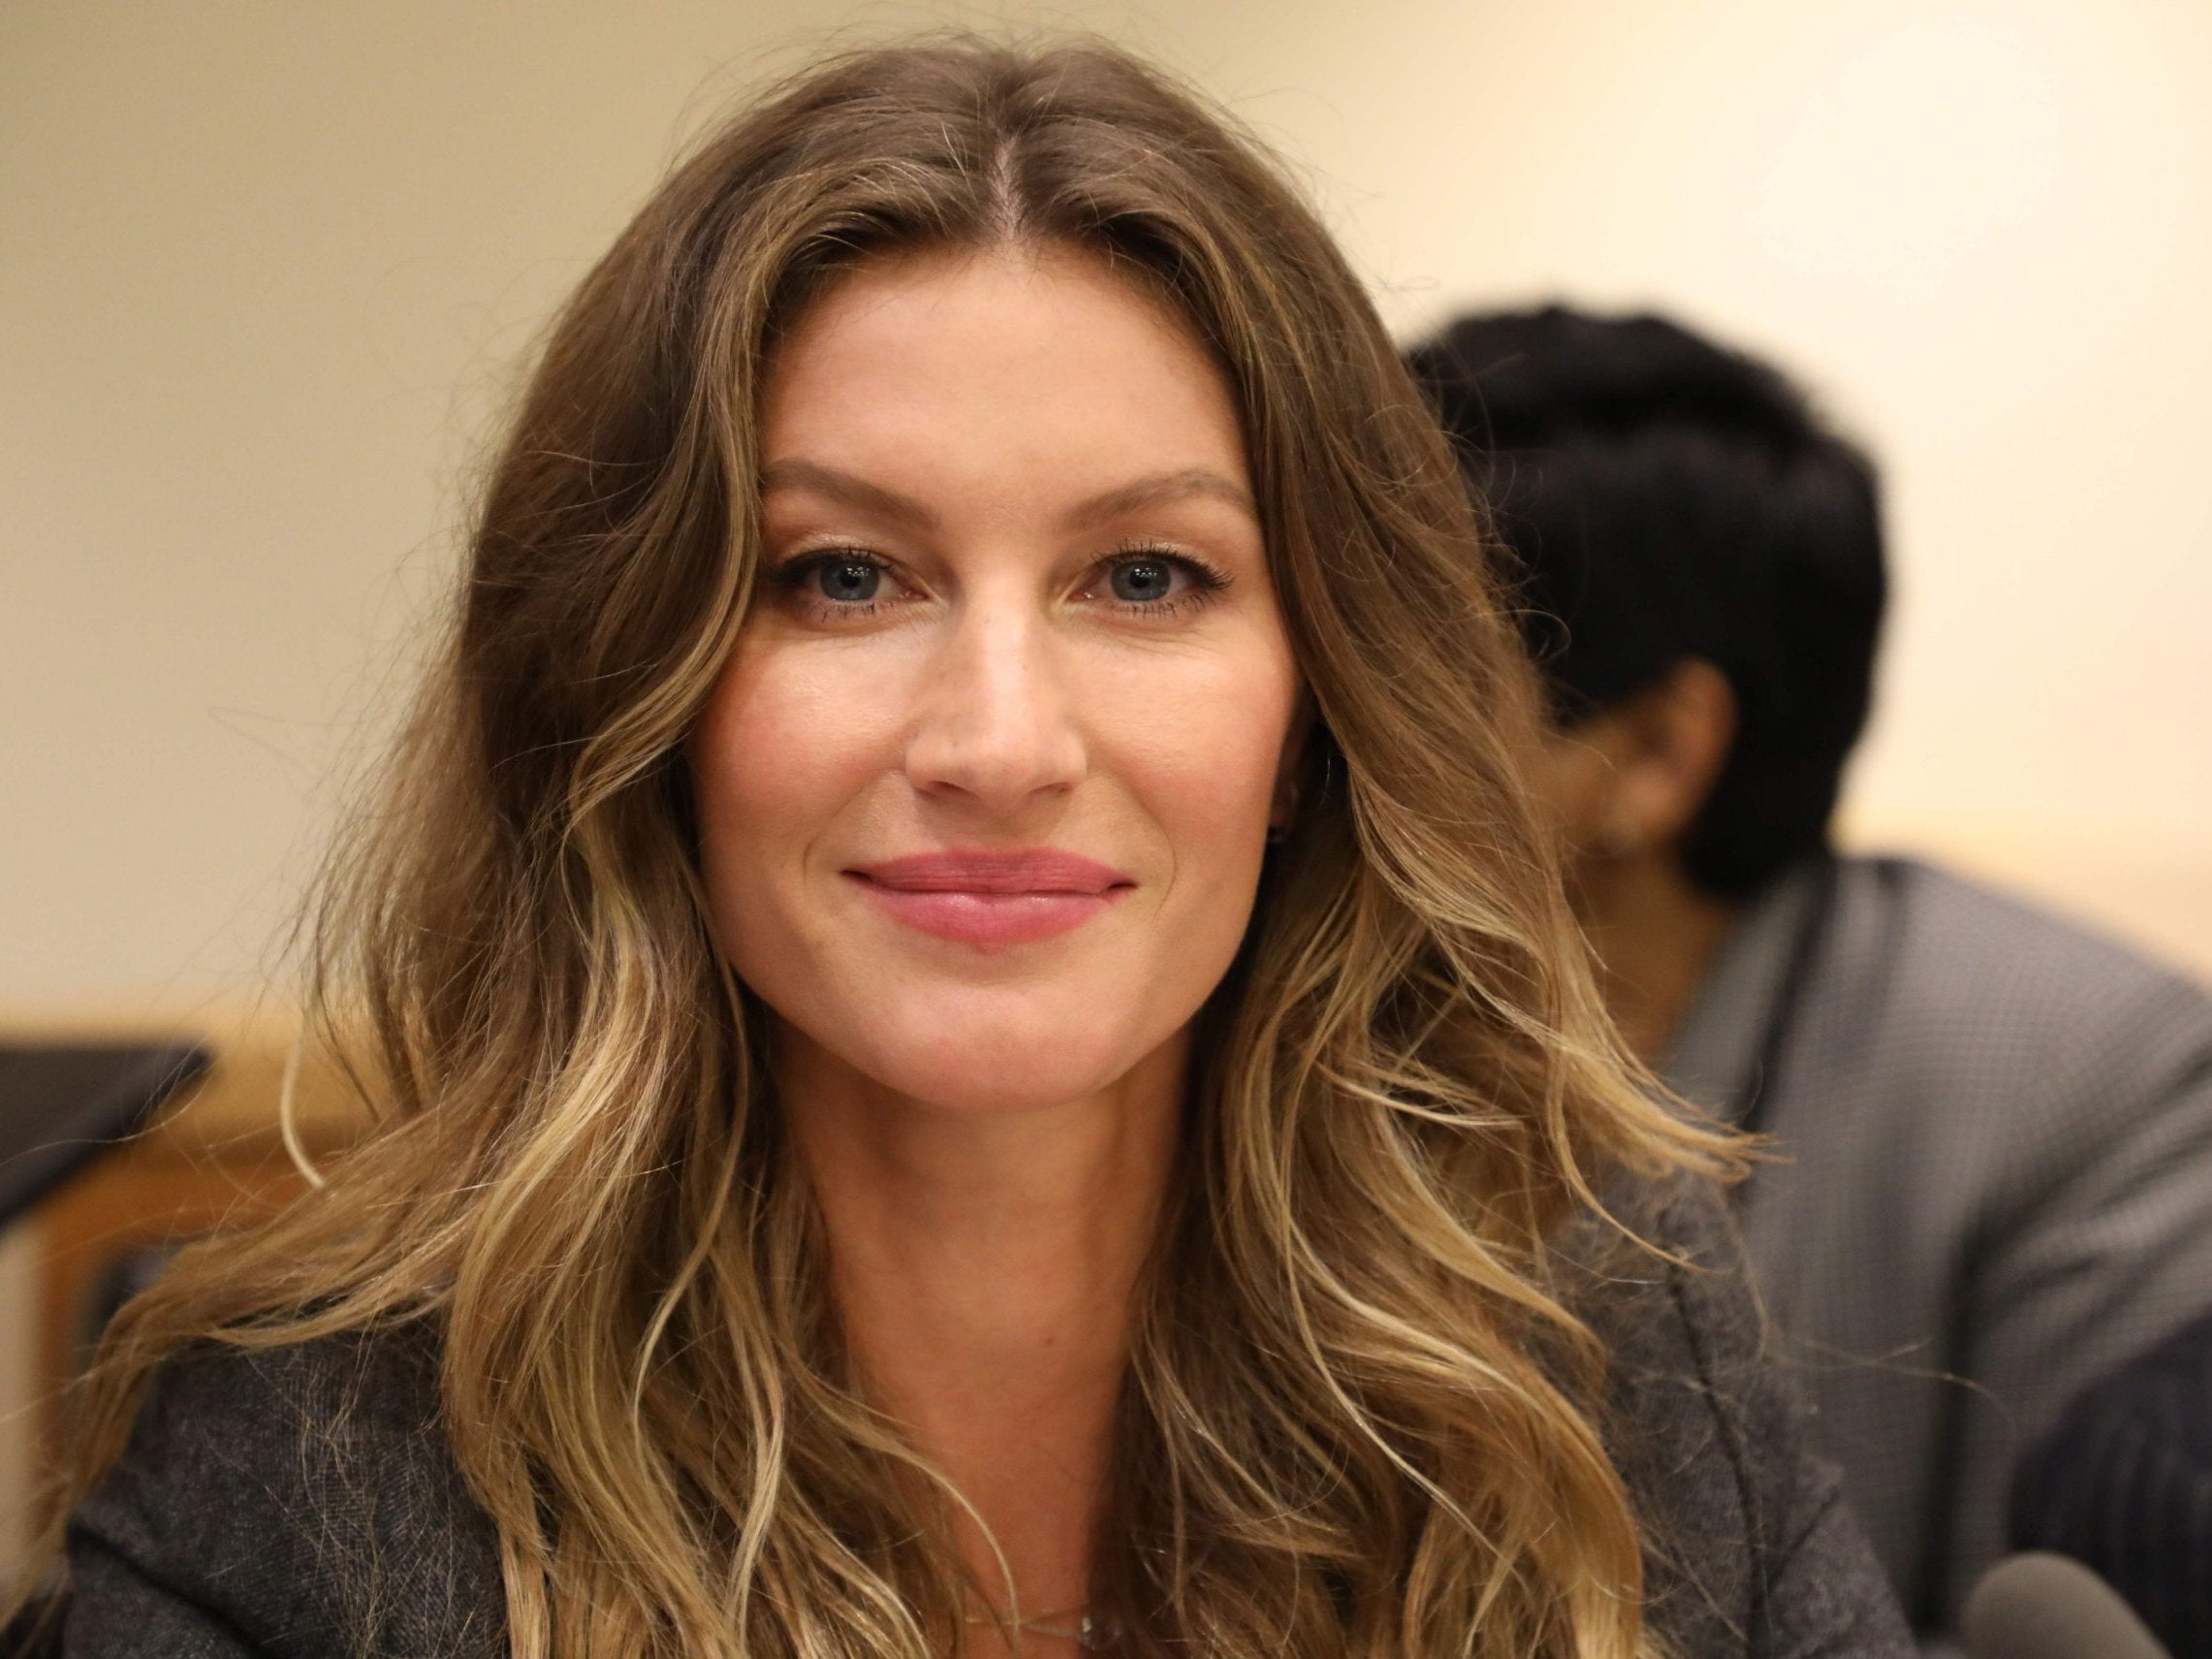 Supermodel Gisele Bundchen has been arguing with her government